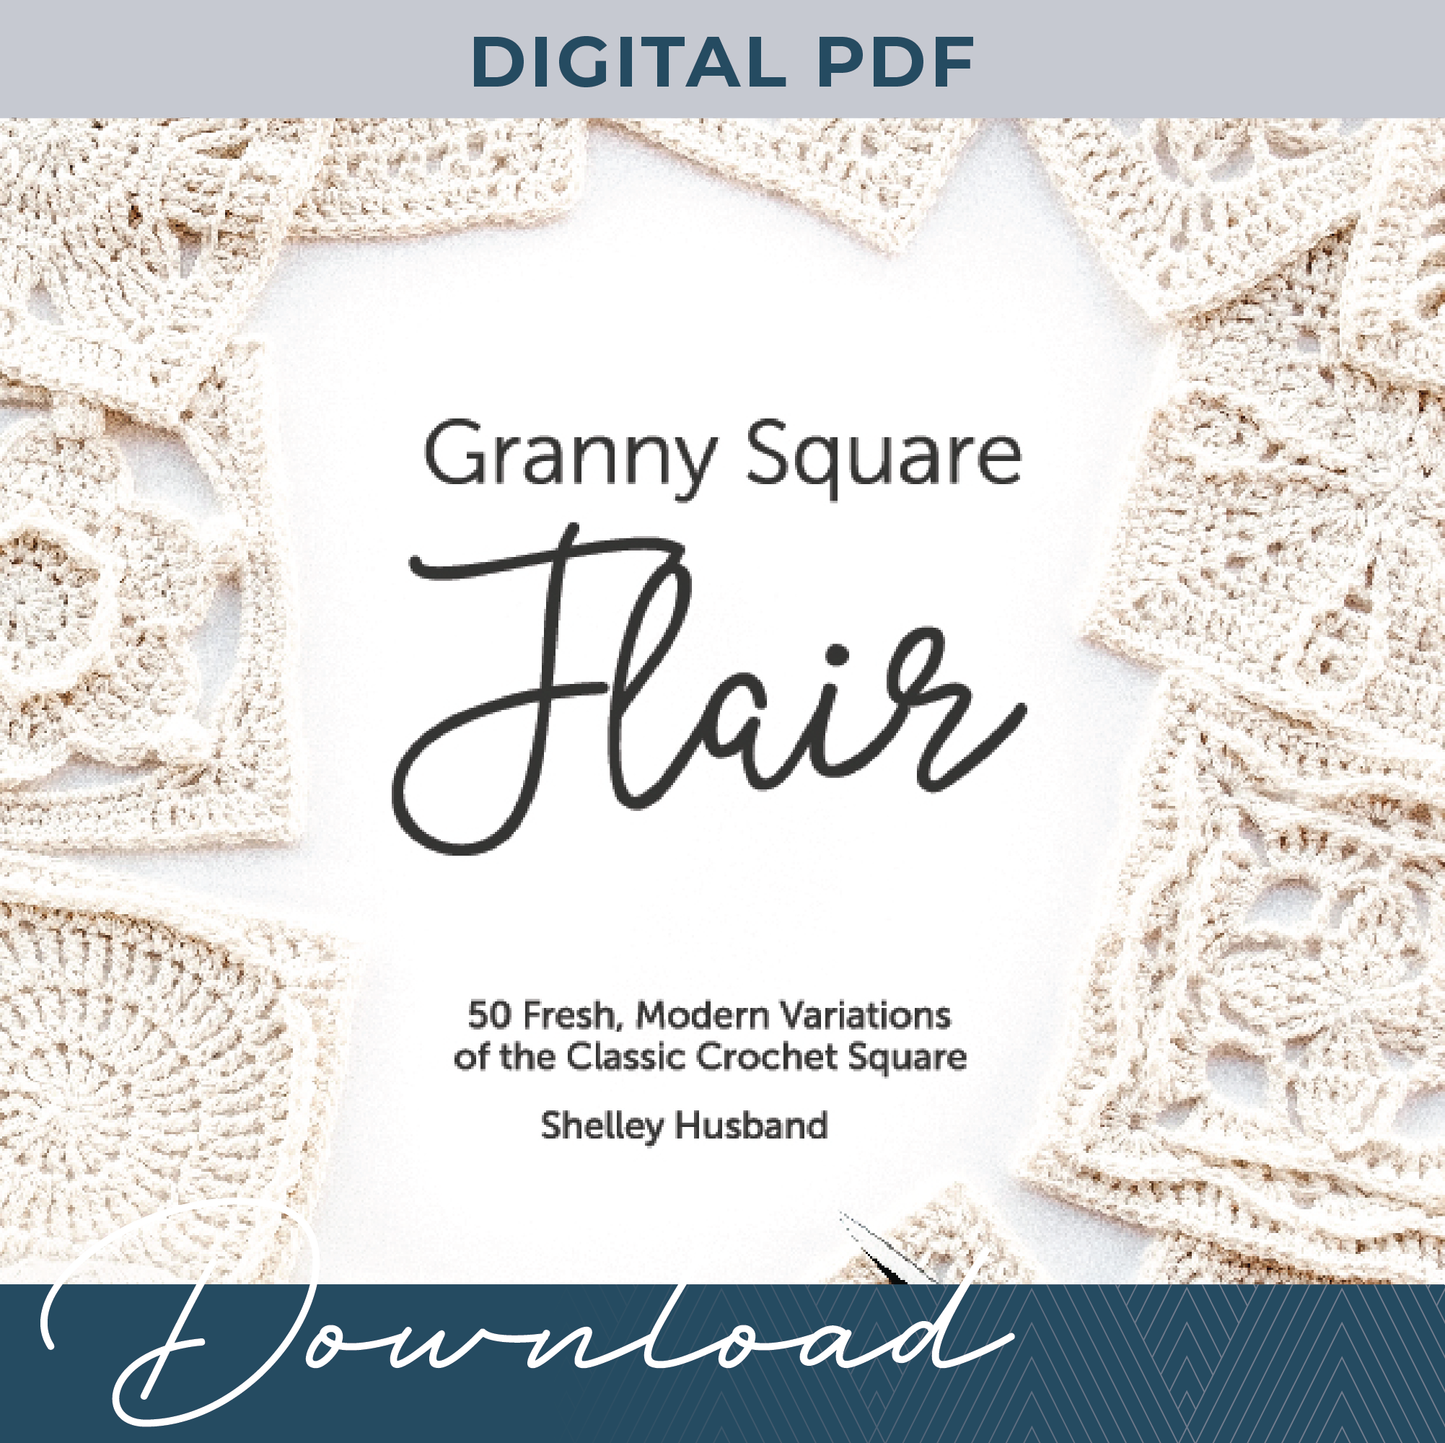 Granny Square Flair Digital Edition by Shelley Husband